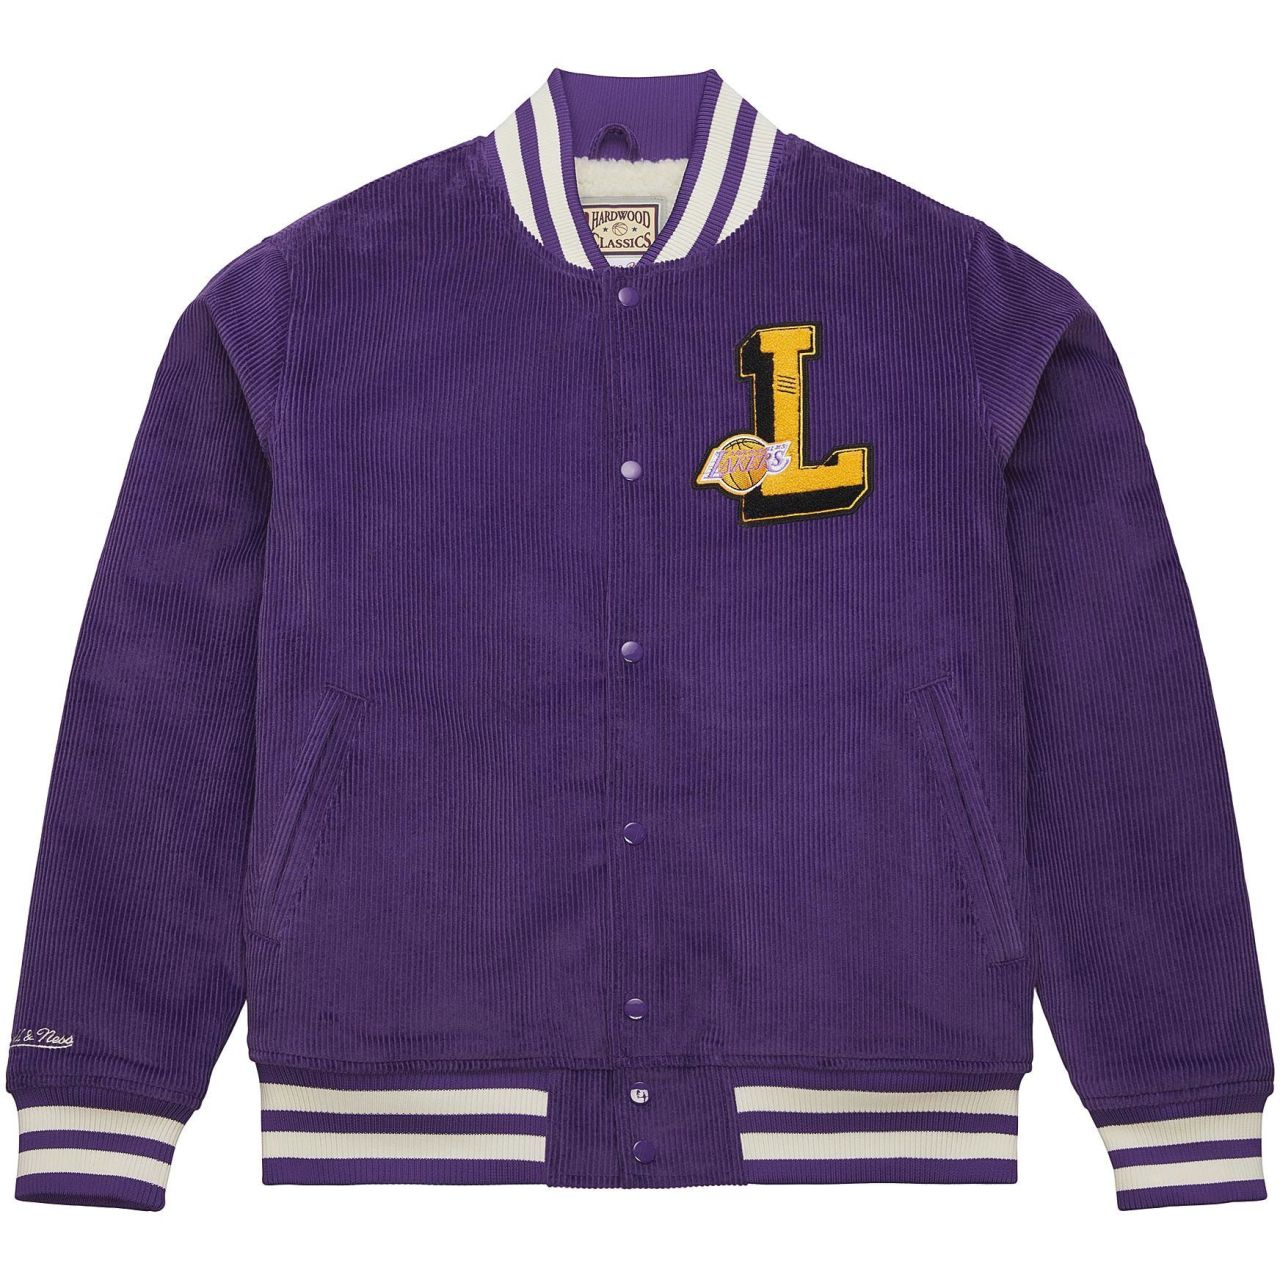 M&N Varsity Kord Sherpa College Jacke Los Angeles Lakers von Mitchell & Ness